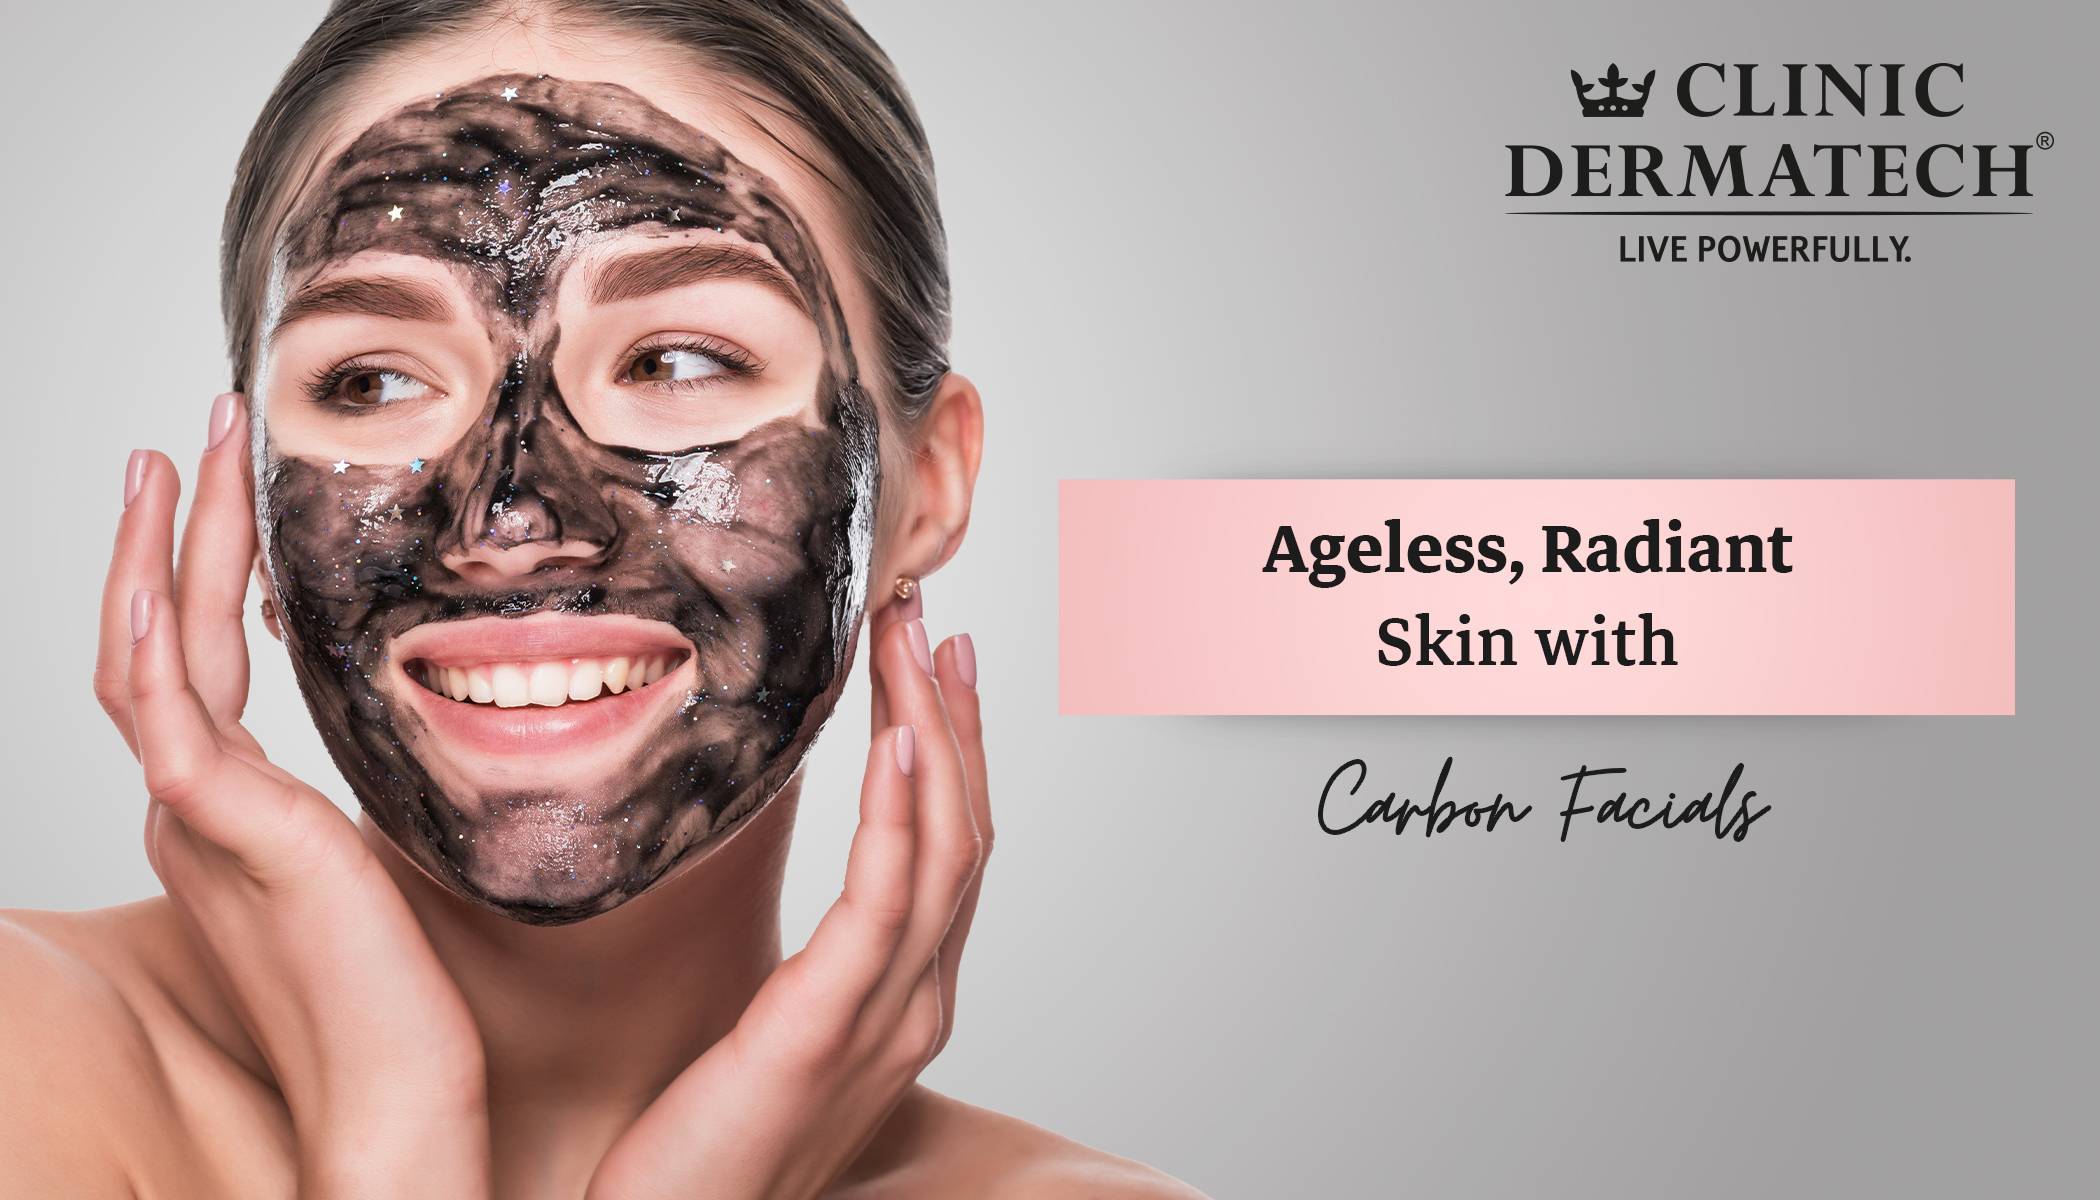 Ageless, Radiant Skin with Carbon Facials - Clinic Dermatech